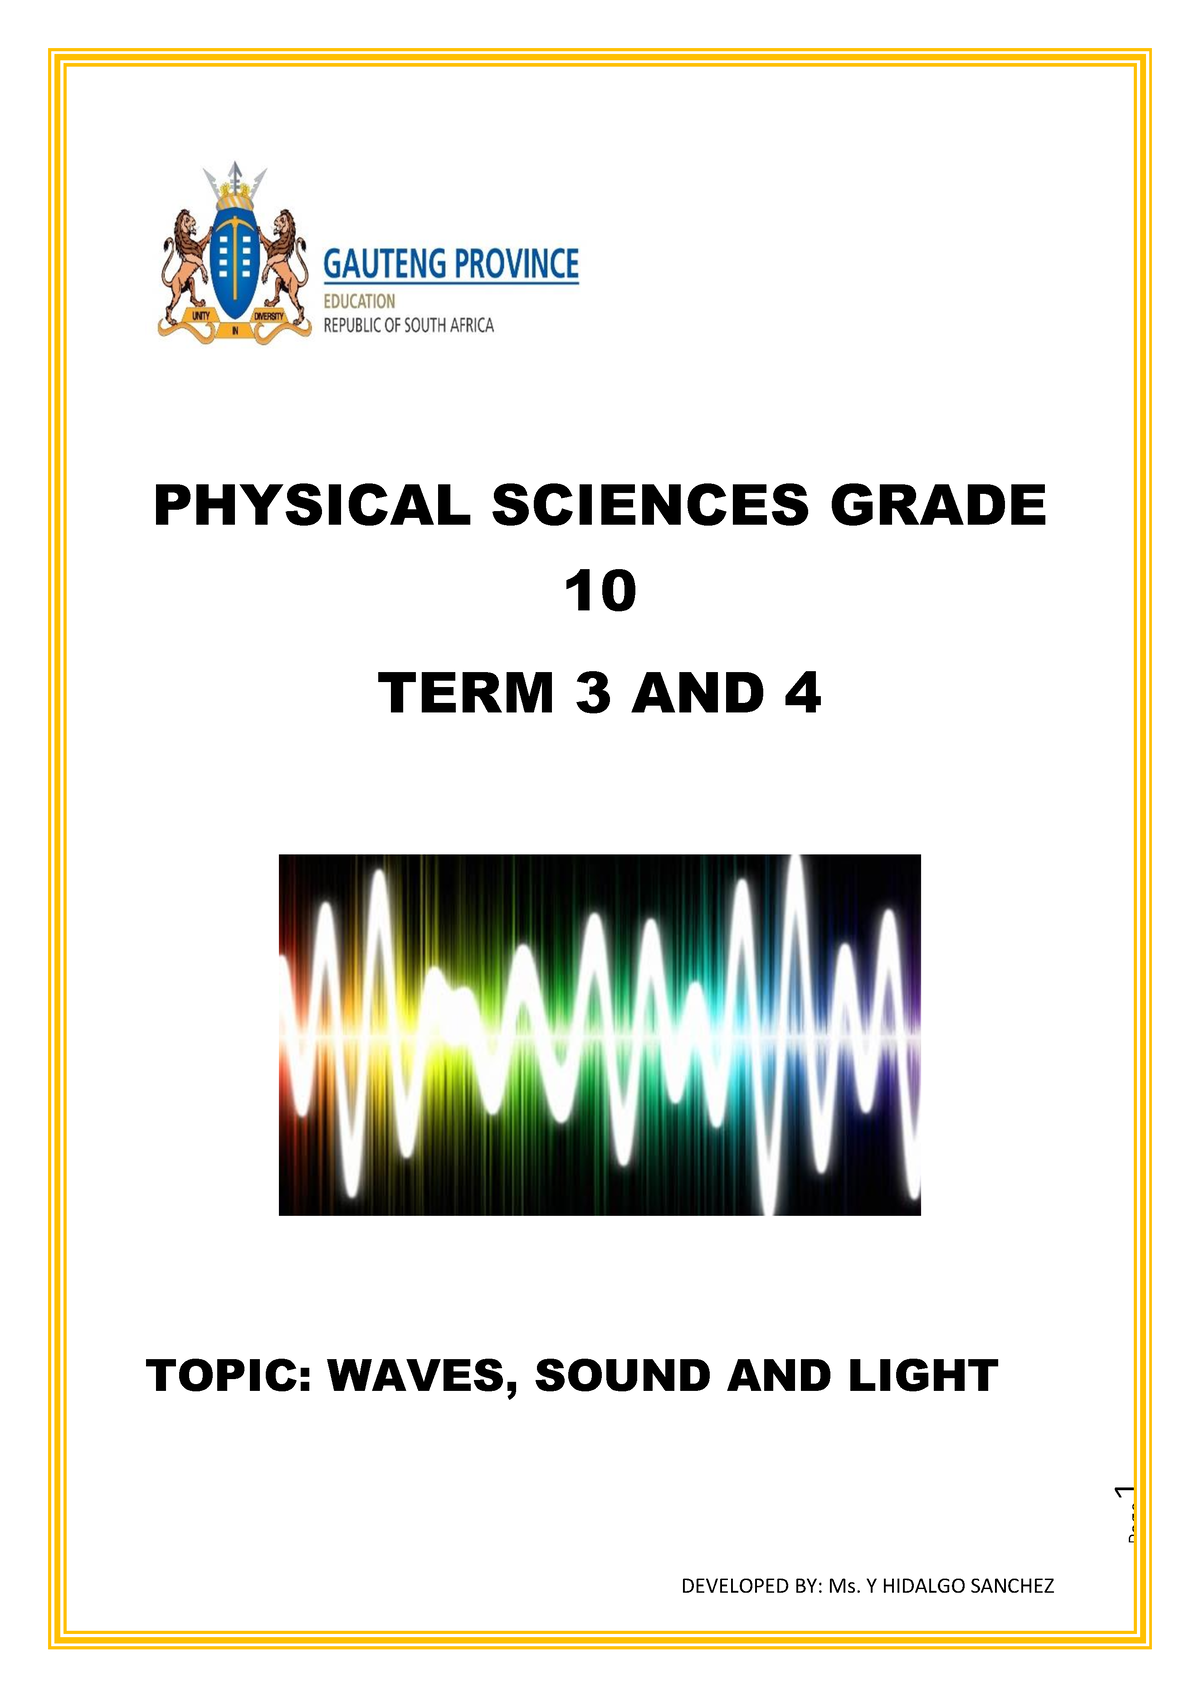 Grade 10 Waves Sound And Light Page 1 Physical Sciences Grade 10